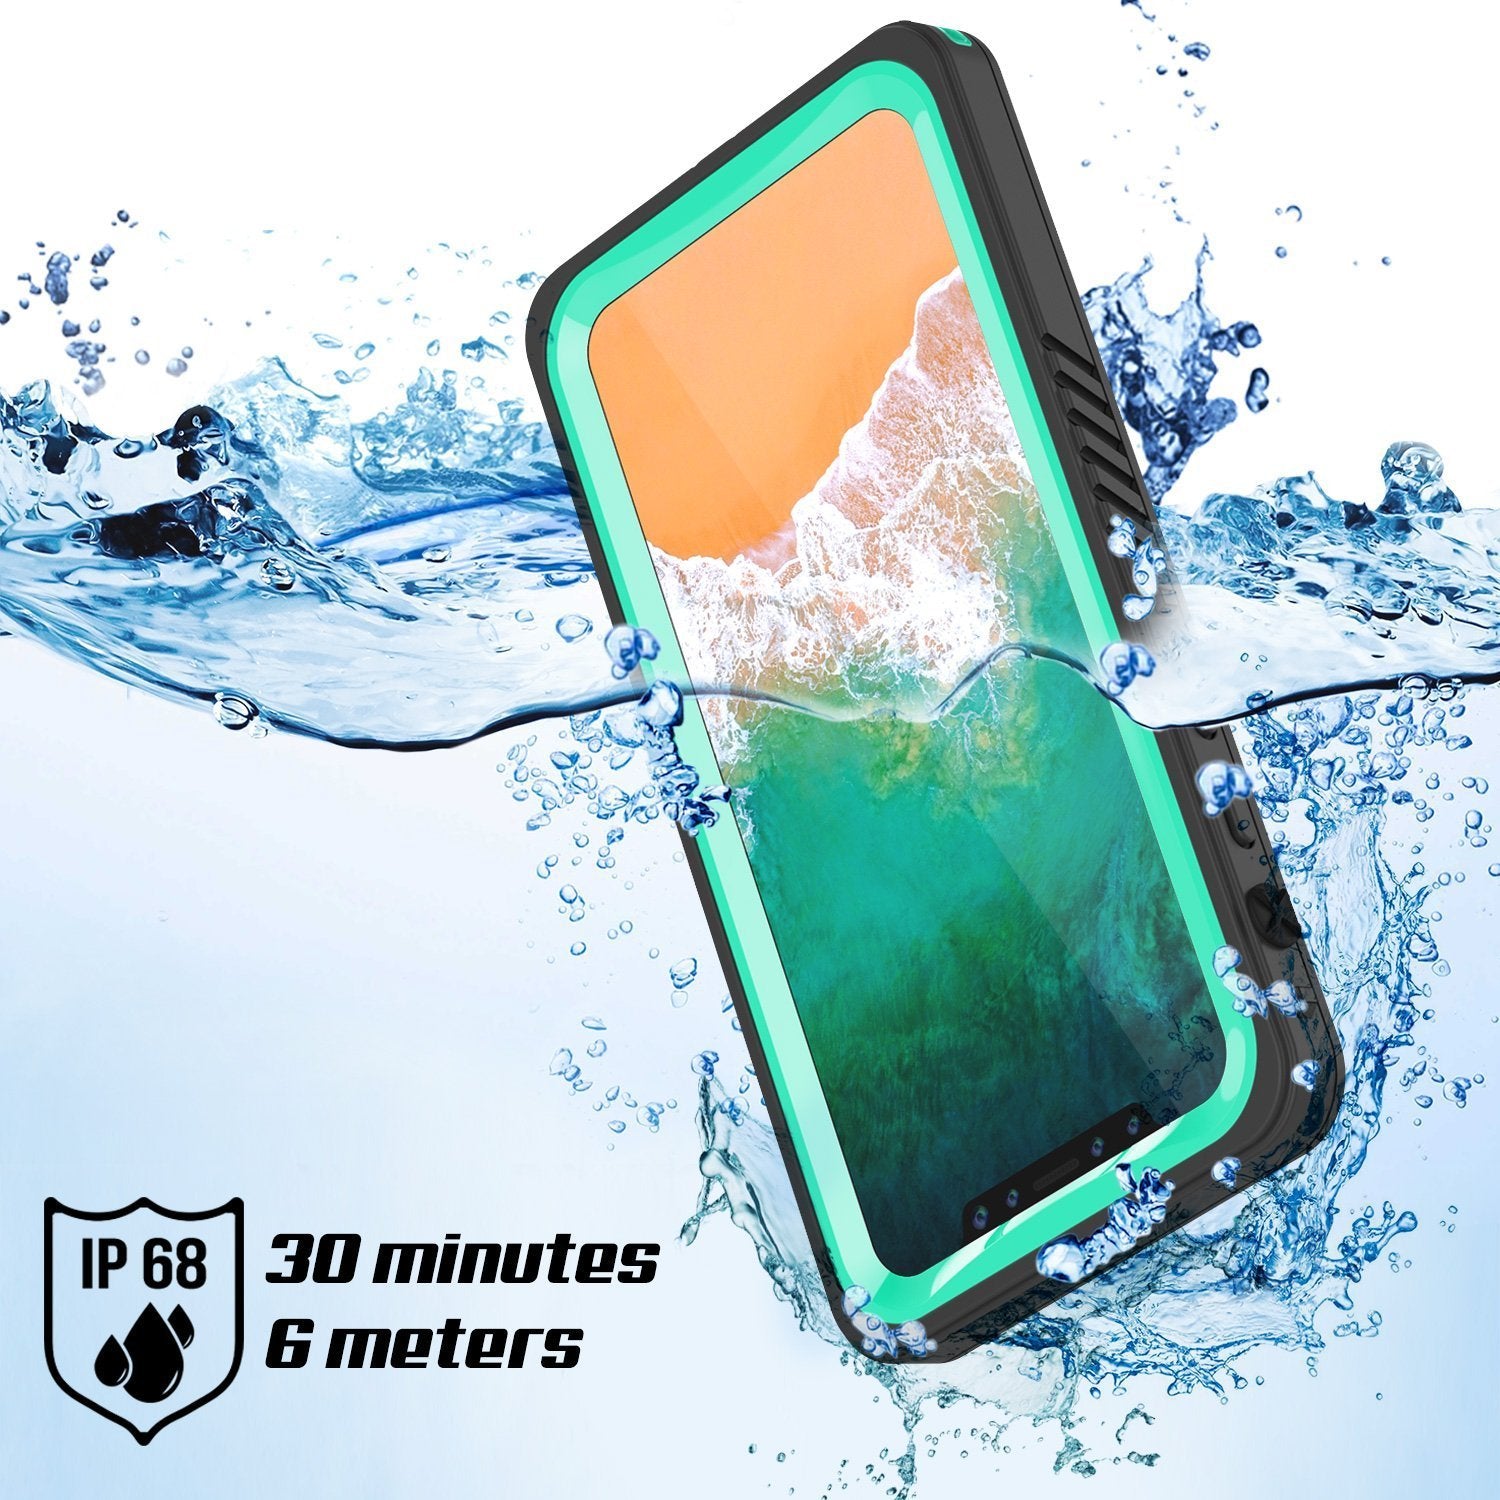 iPhone XS Max Waterproof Case, Punkcase [Extreme Series] Armor Cover W/ Built In Screen Protector [Teal]